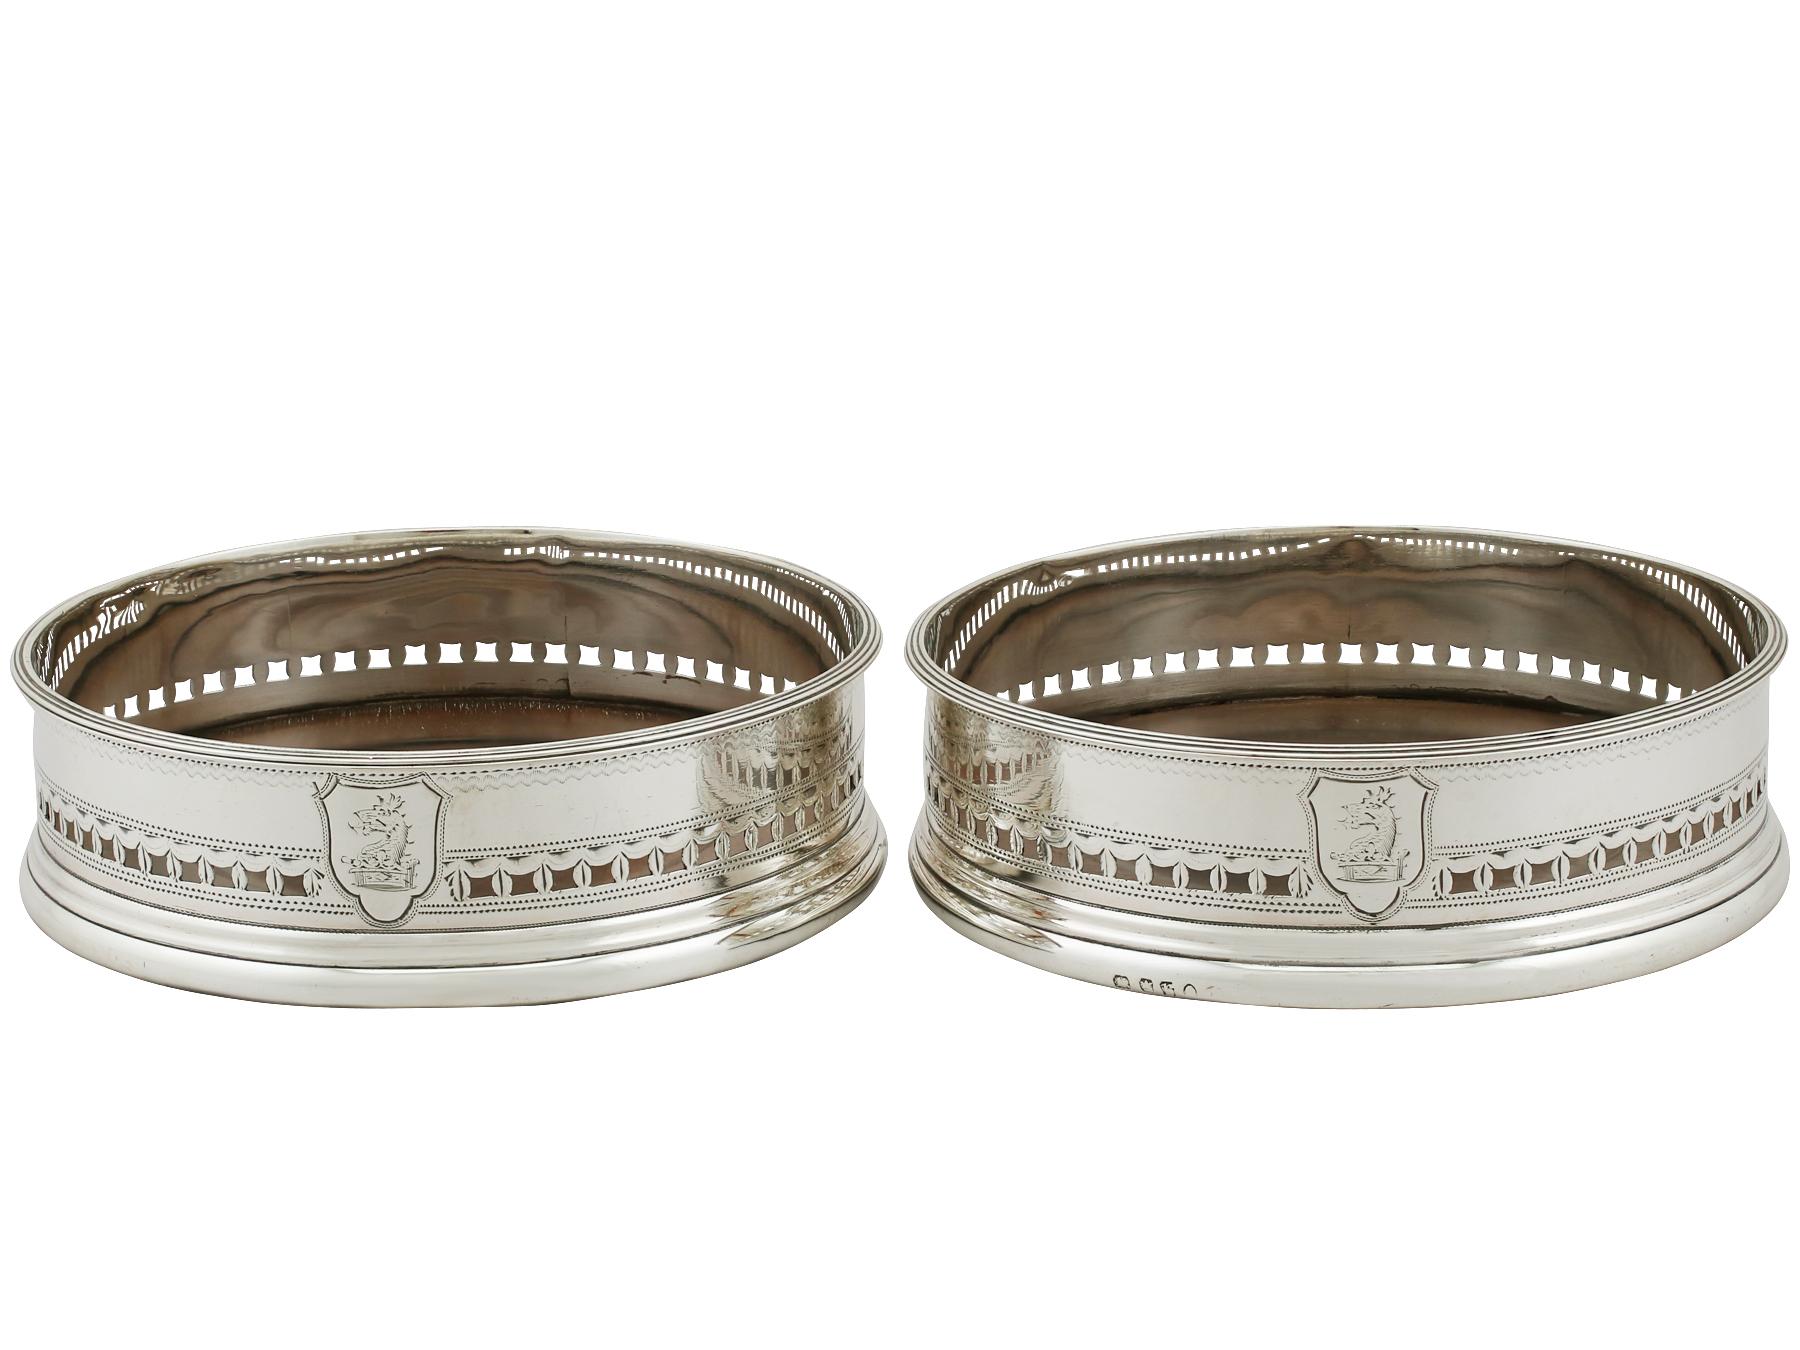 An exceptional, fine and impressive pair of antique Georgian English sterling silver and mahogany wood coasters.

These antique George III sterling silver coasters have a plain cylindrical form.

The surface of each coaster is embellished with a